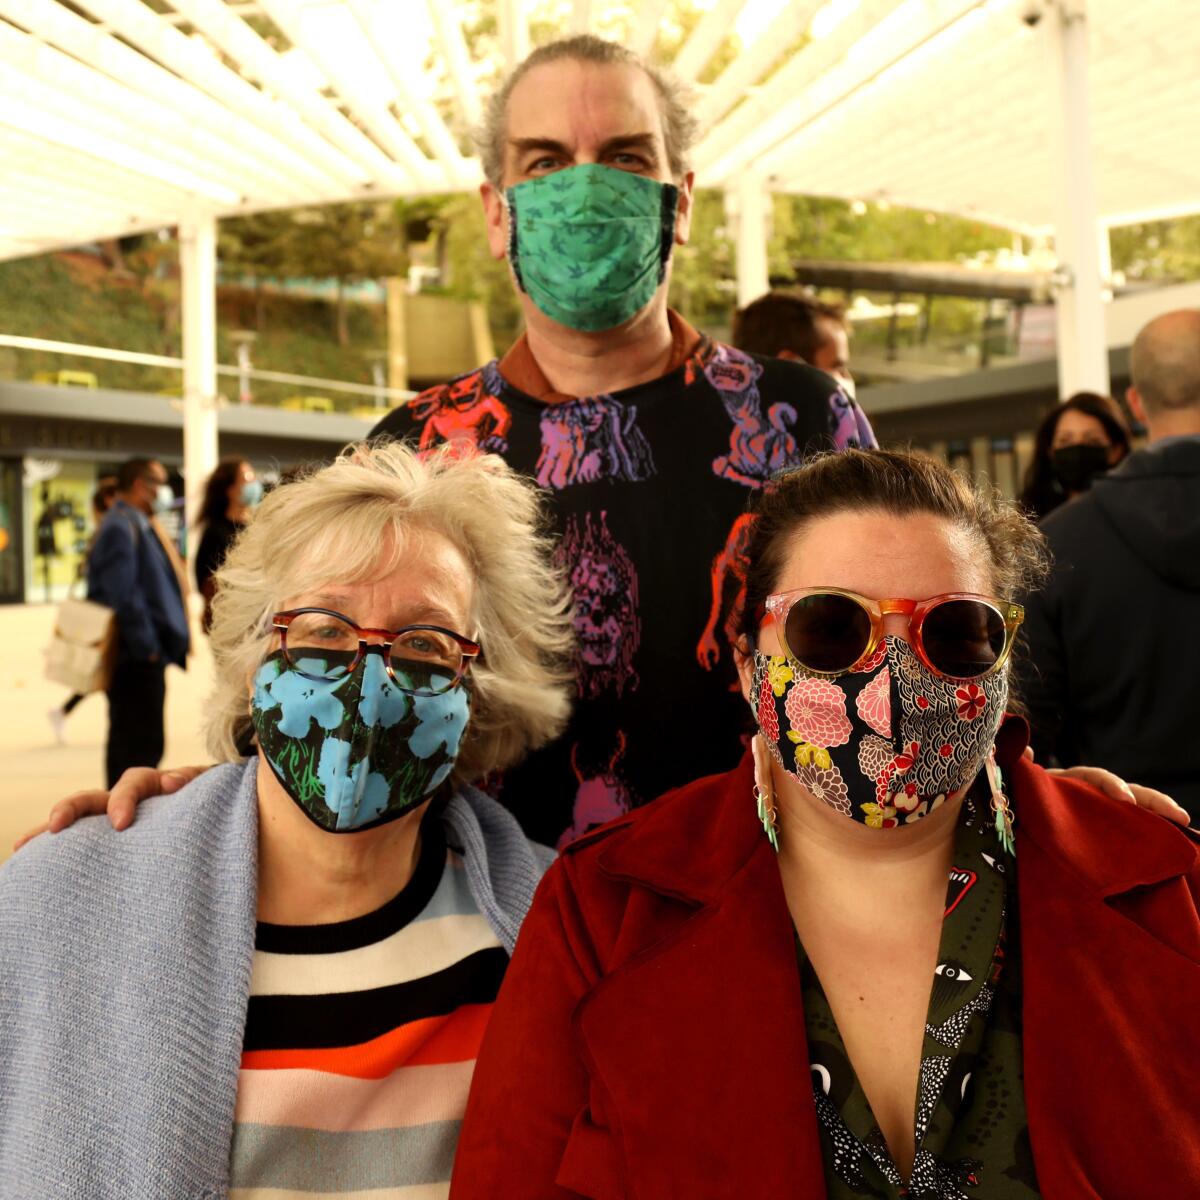 A man and two women in colorful face masks pose for a photo.